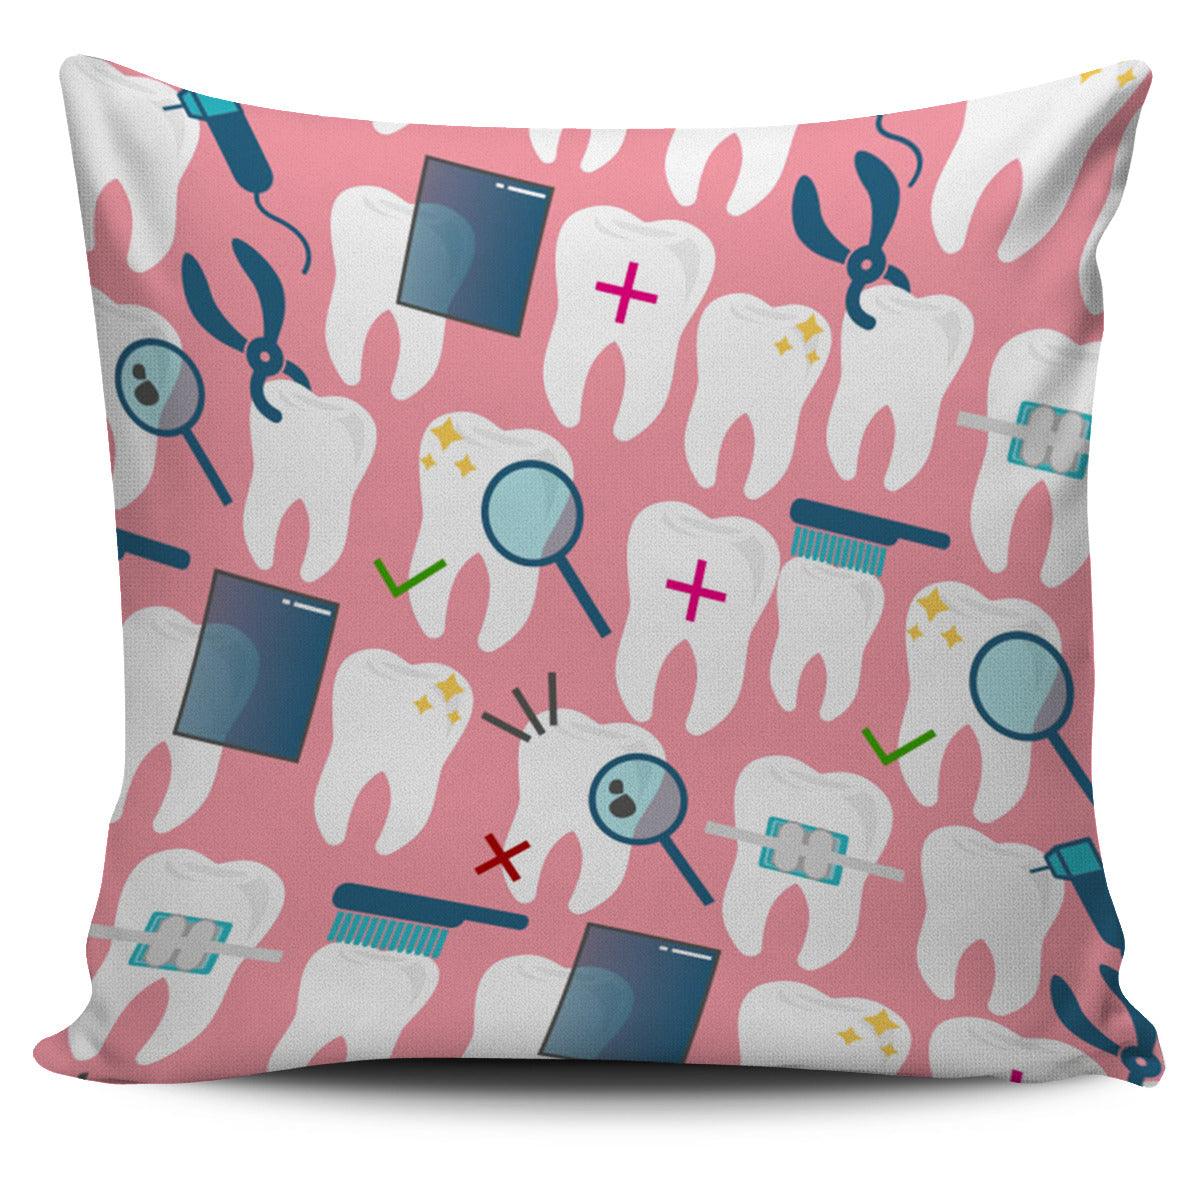 Dental Hygienist Pillow Cover - Thumbedtreats